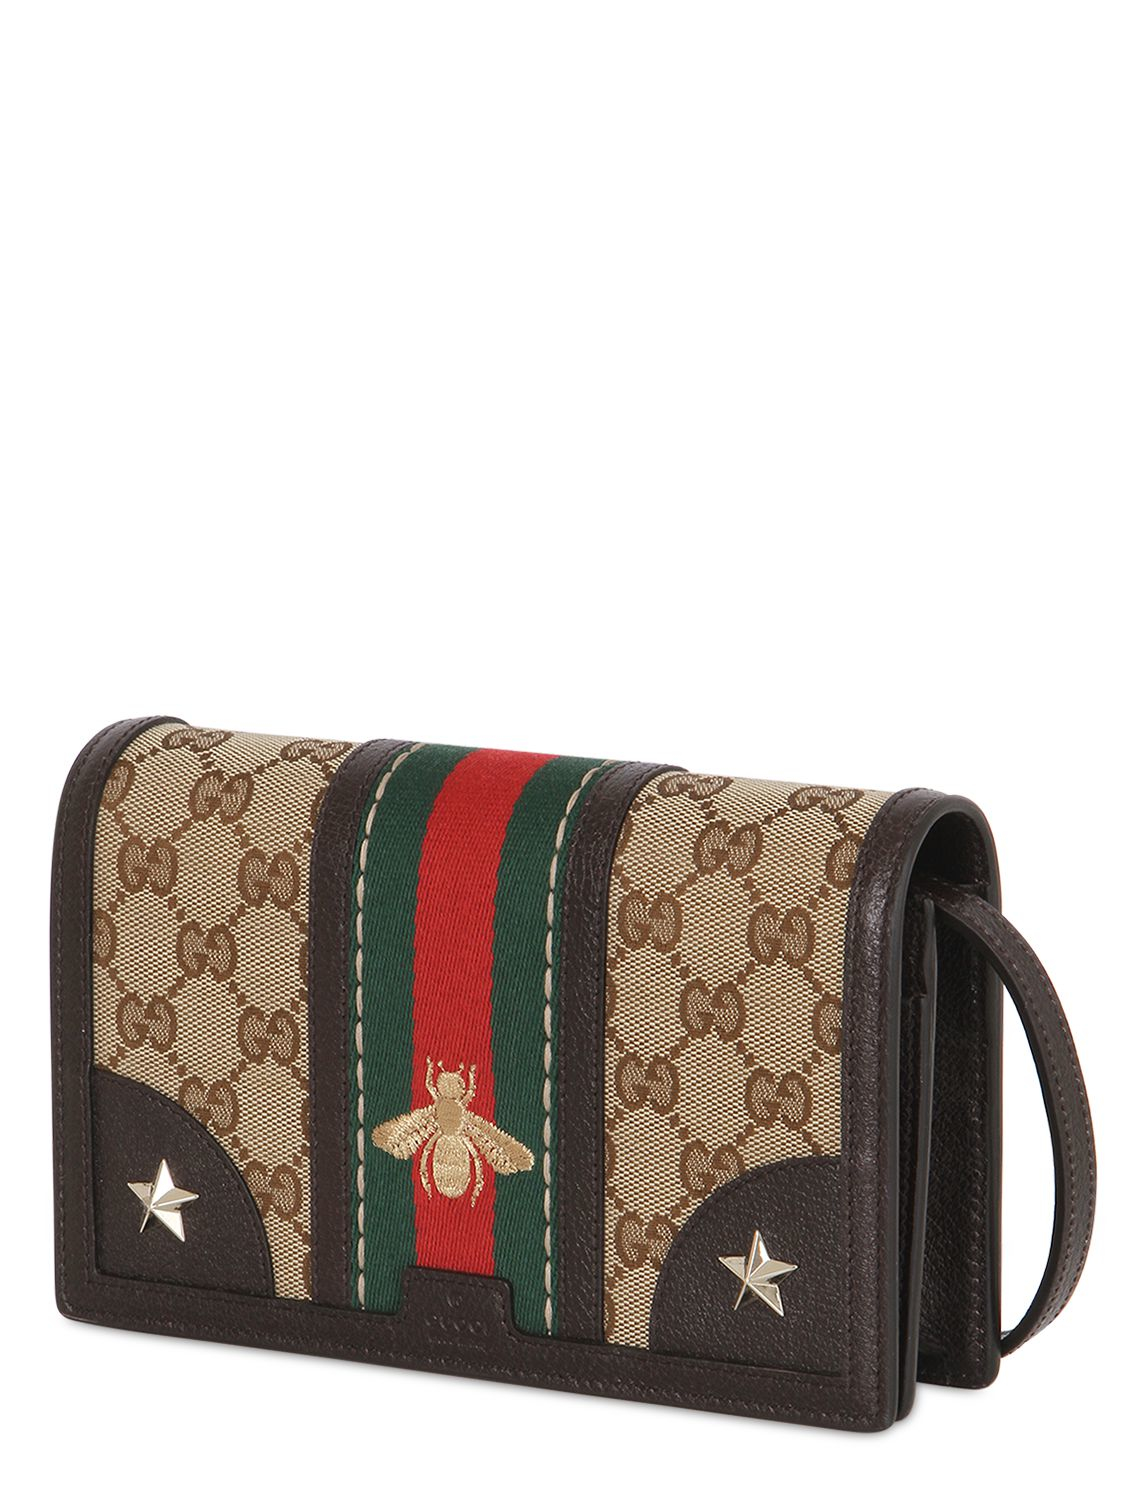 Lyst - Gucci GG Supreme Bee-Embroidered Canvas Bag in Brown